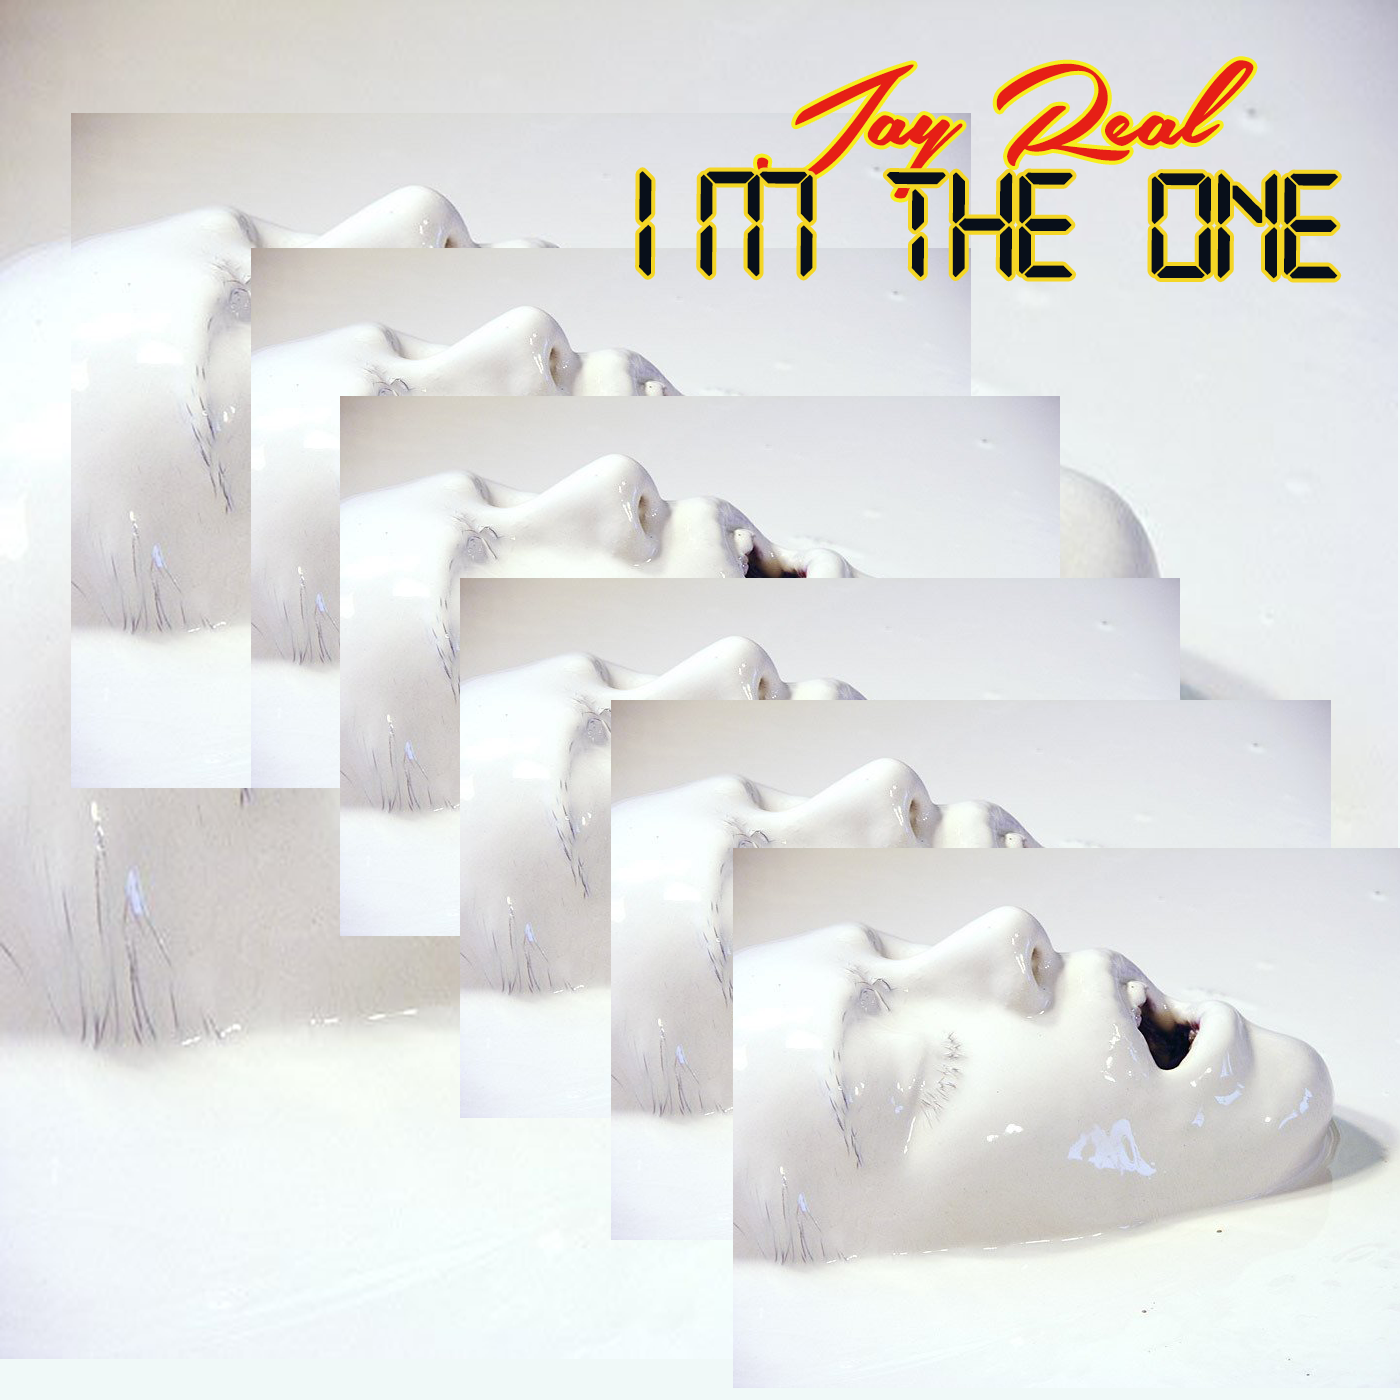 Jay Real – I’m The One